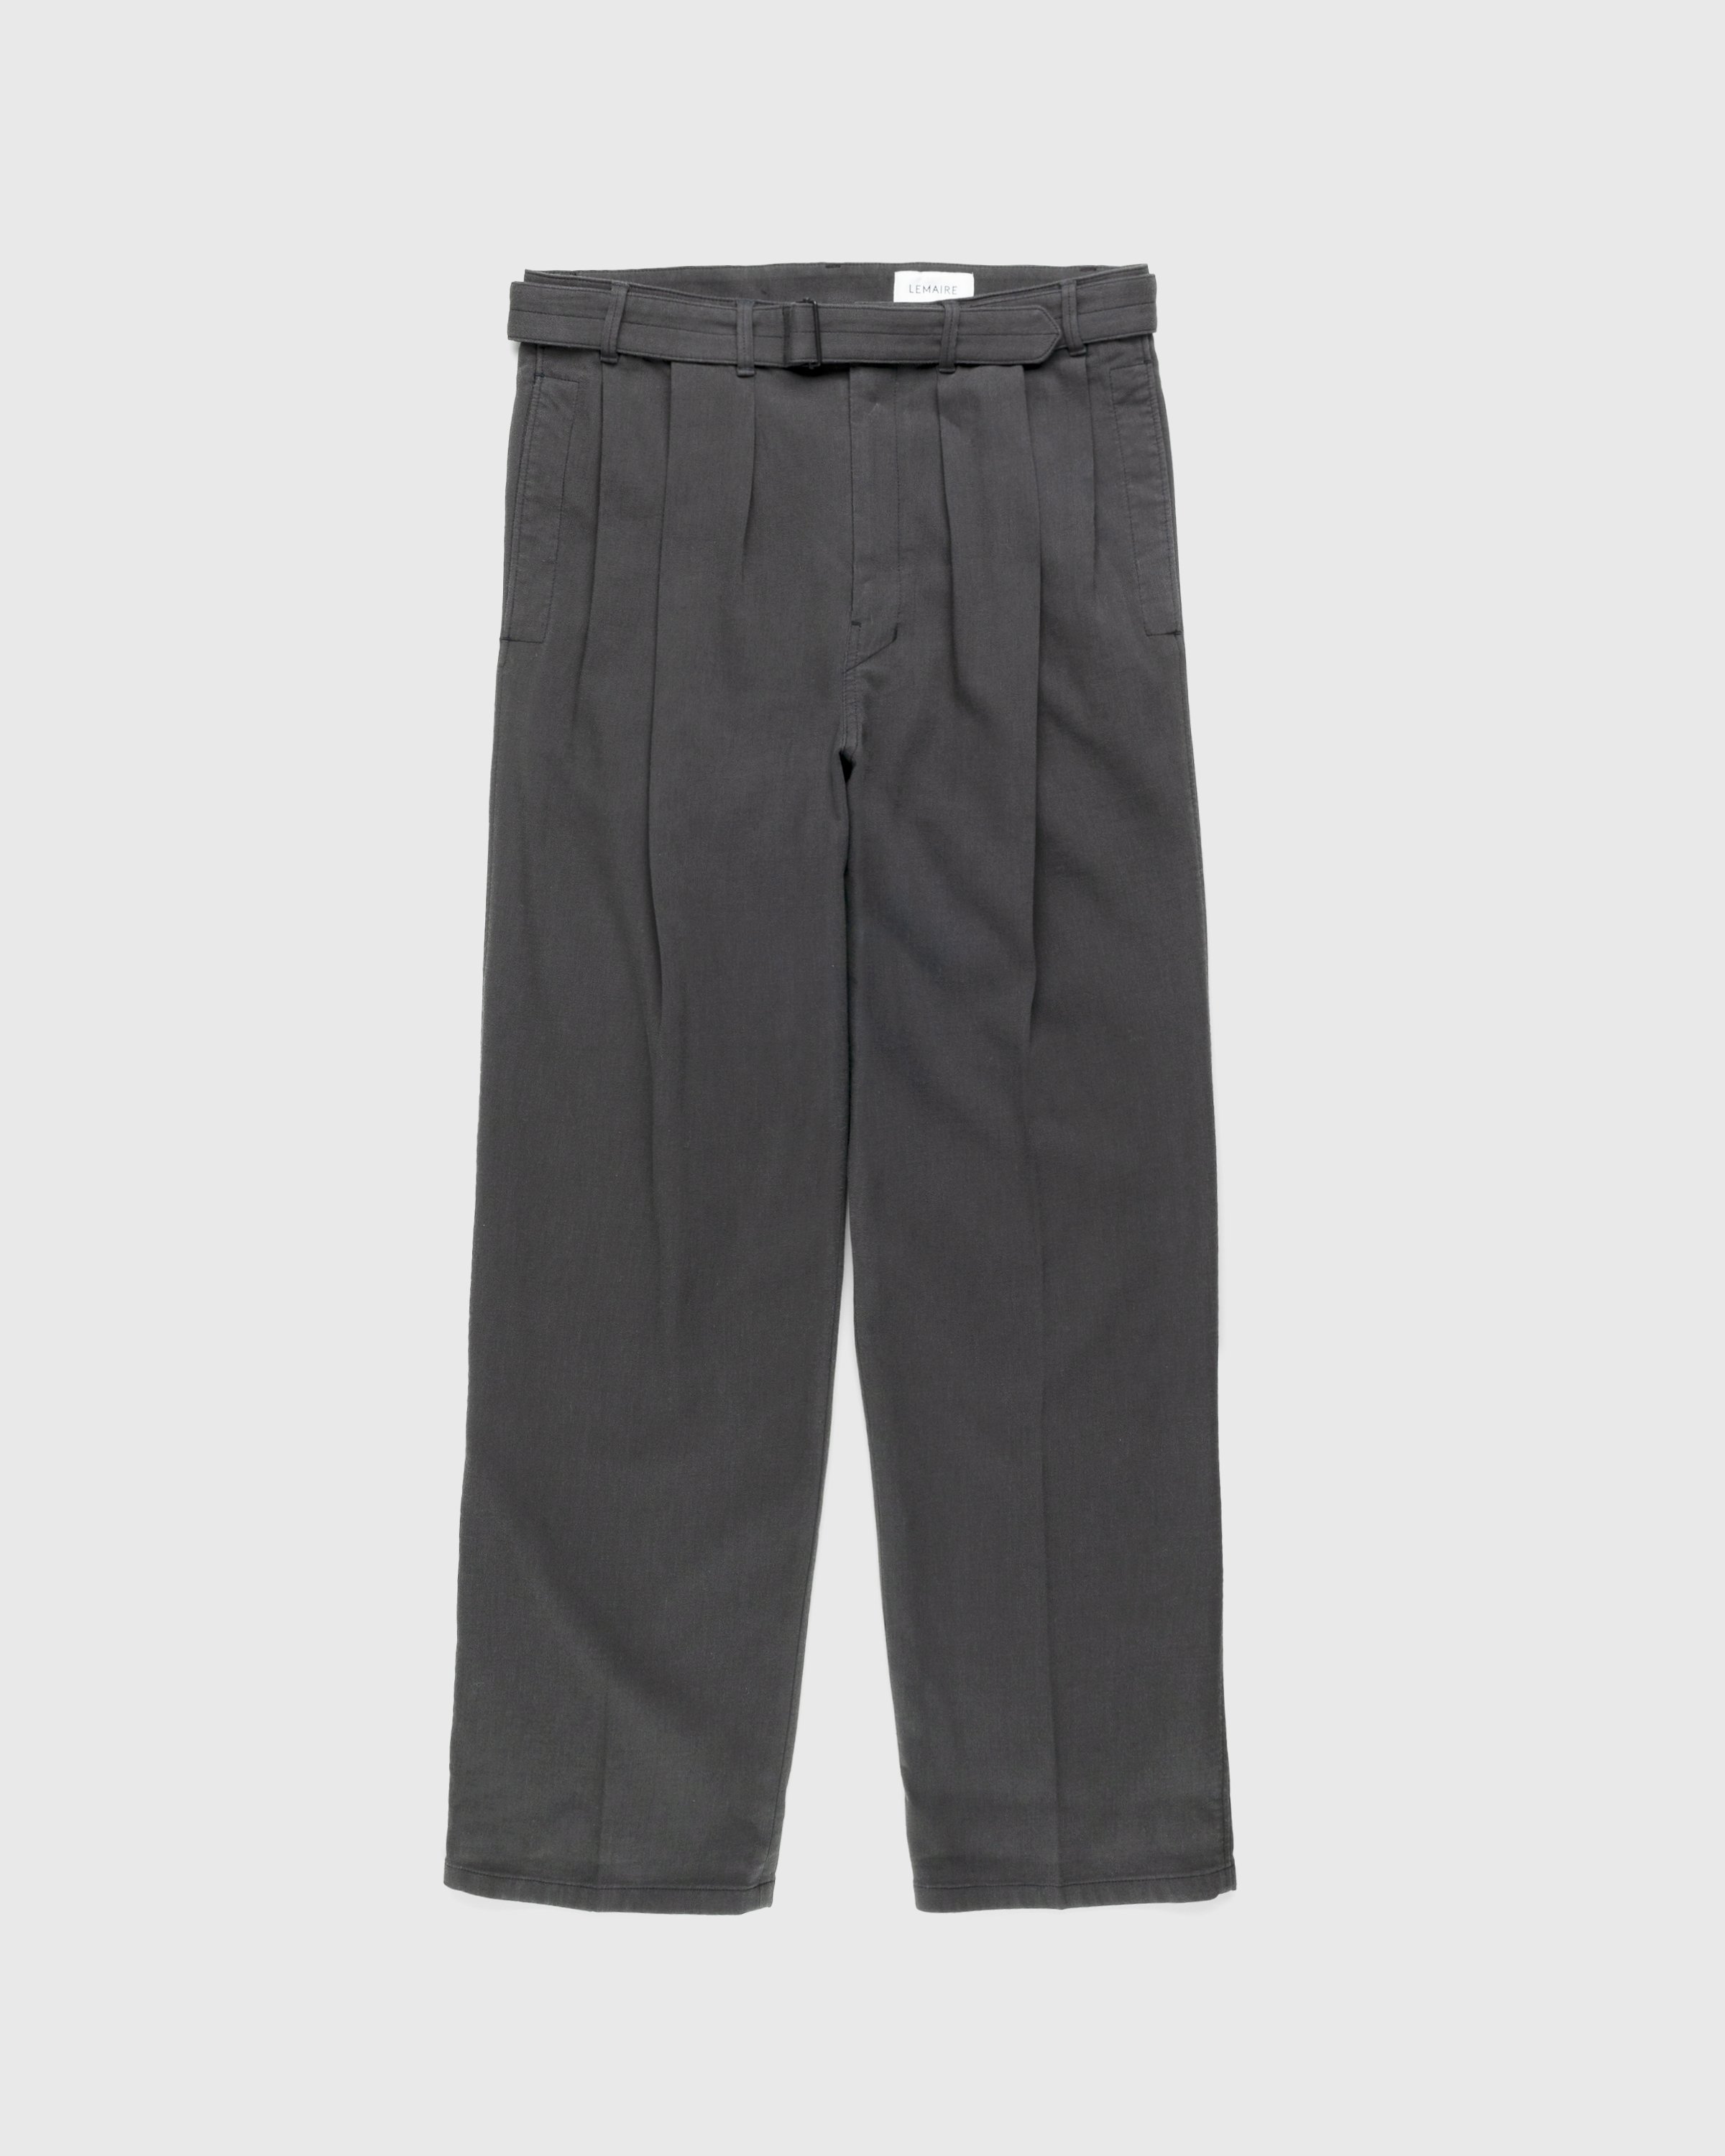 Lemaire – Loose Pleated Pants Grey | Highsnobiety Shop